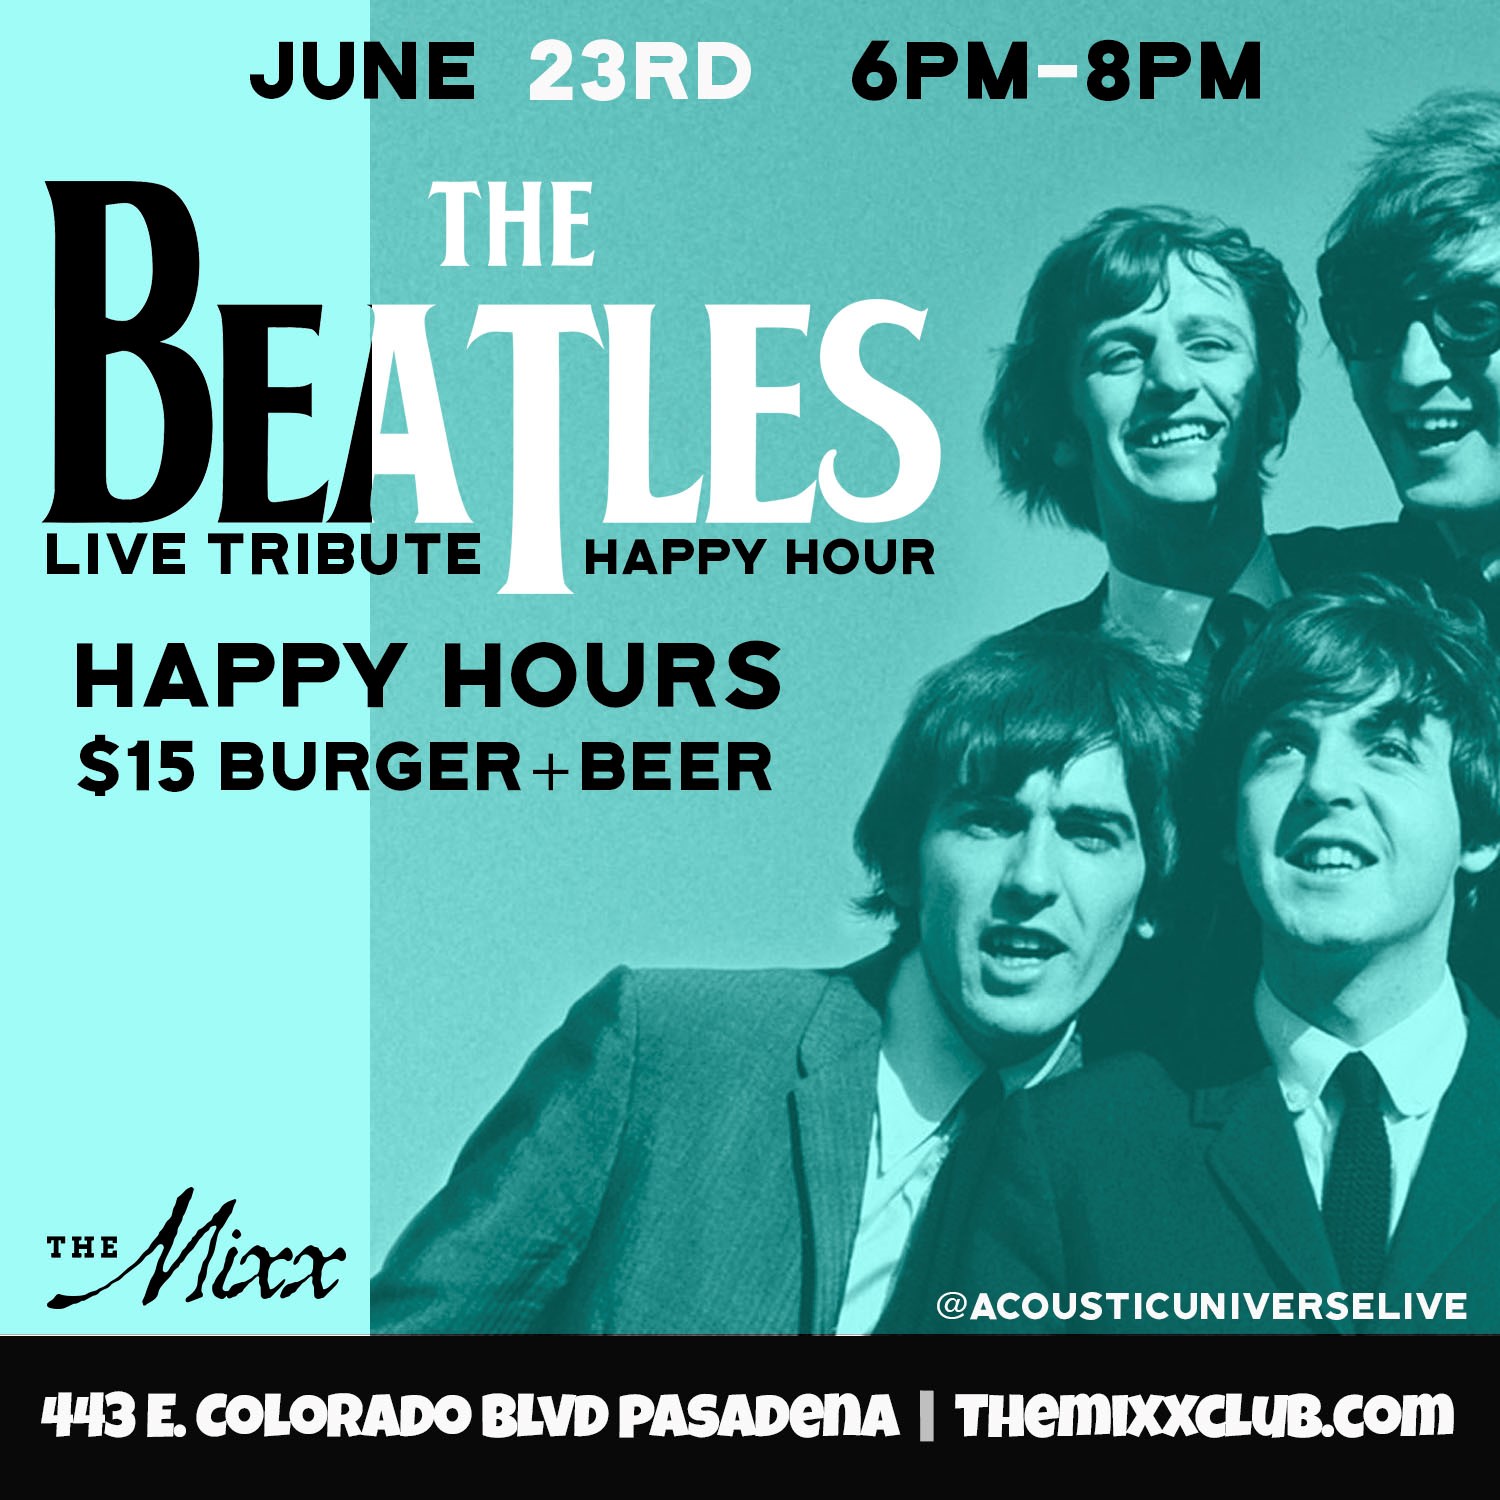 You are currently viewing FREE BEATLES LIVE TRIBUTE & HAPPY HOURS